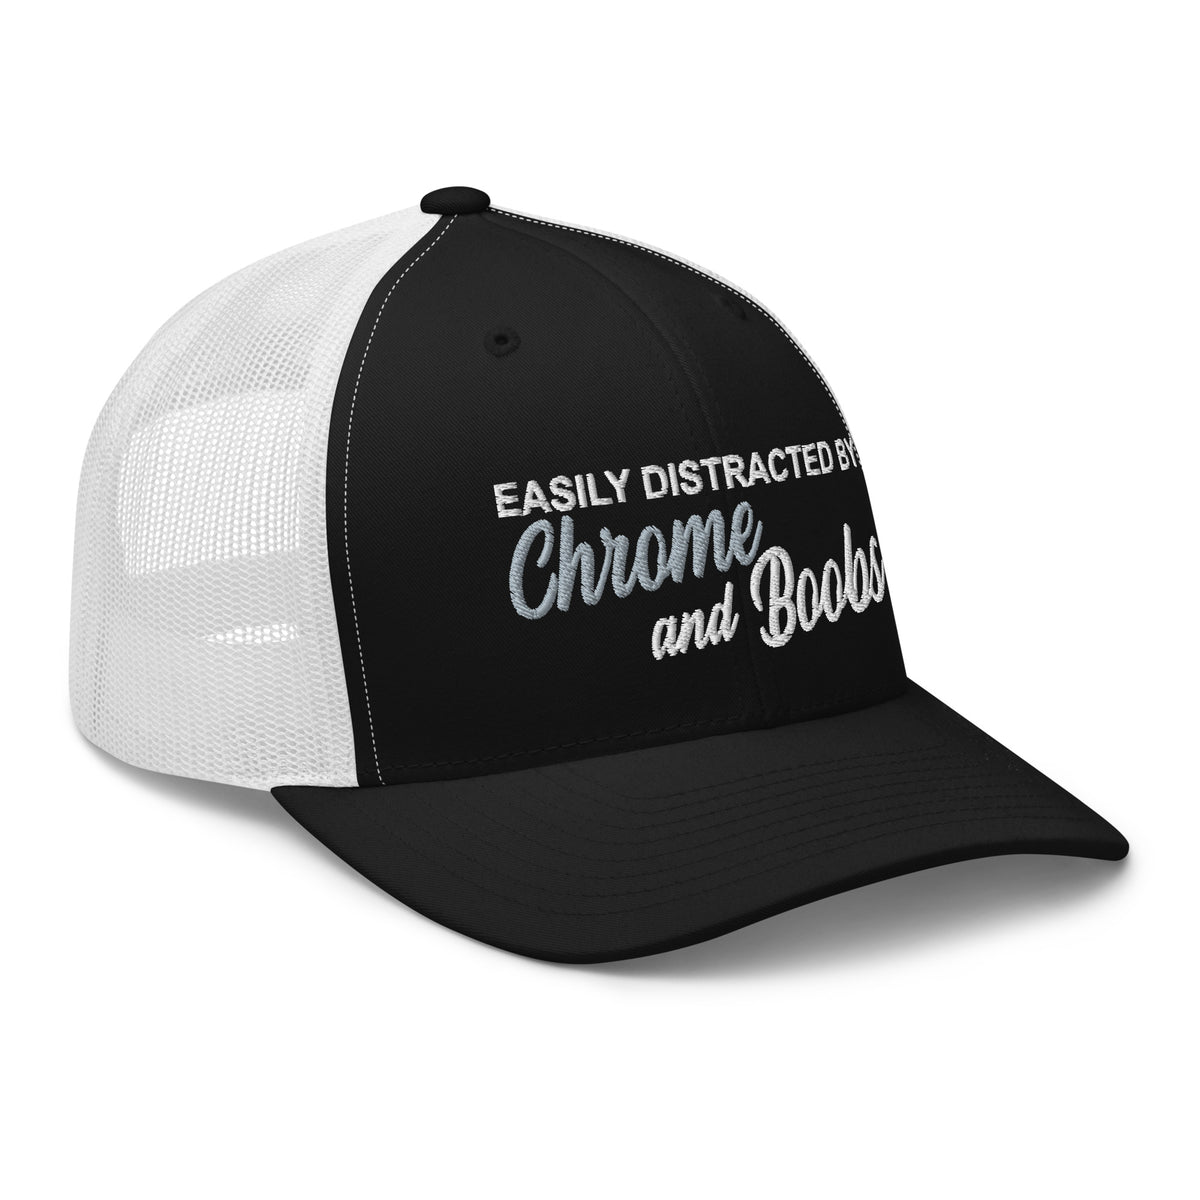 Easily Distracted by Chrome & Boobs - Embroidered Hat - Free Shipping